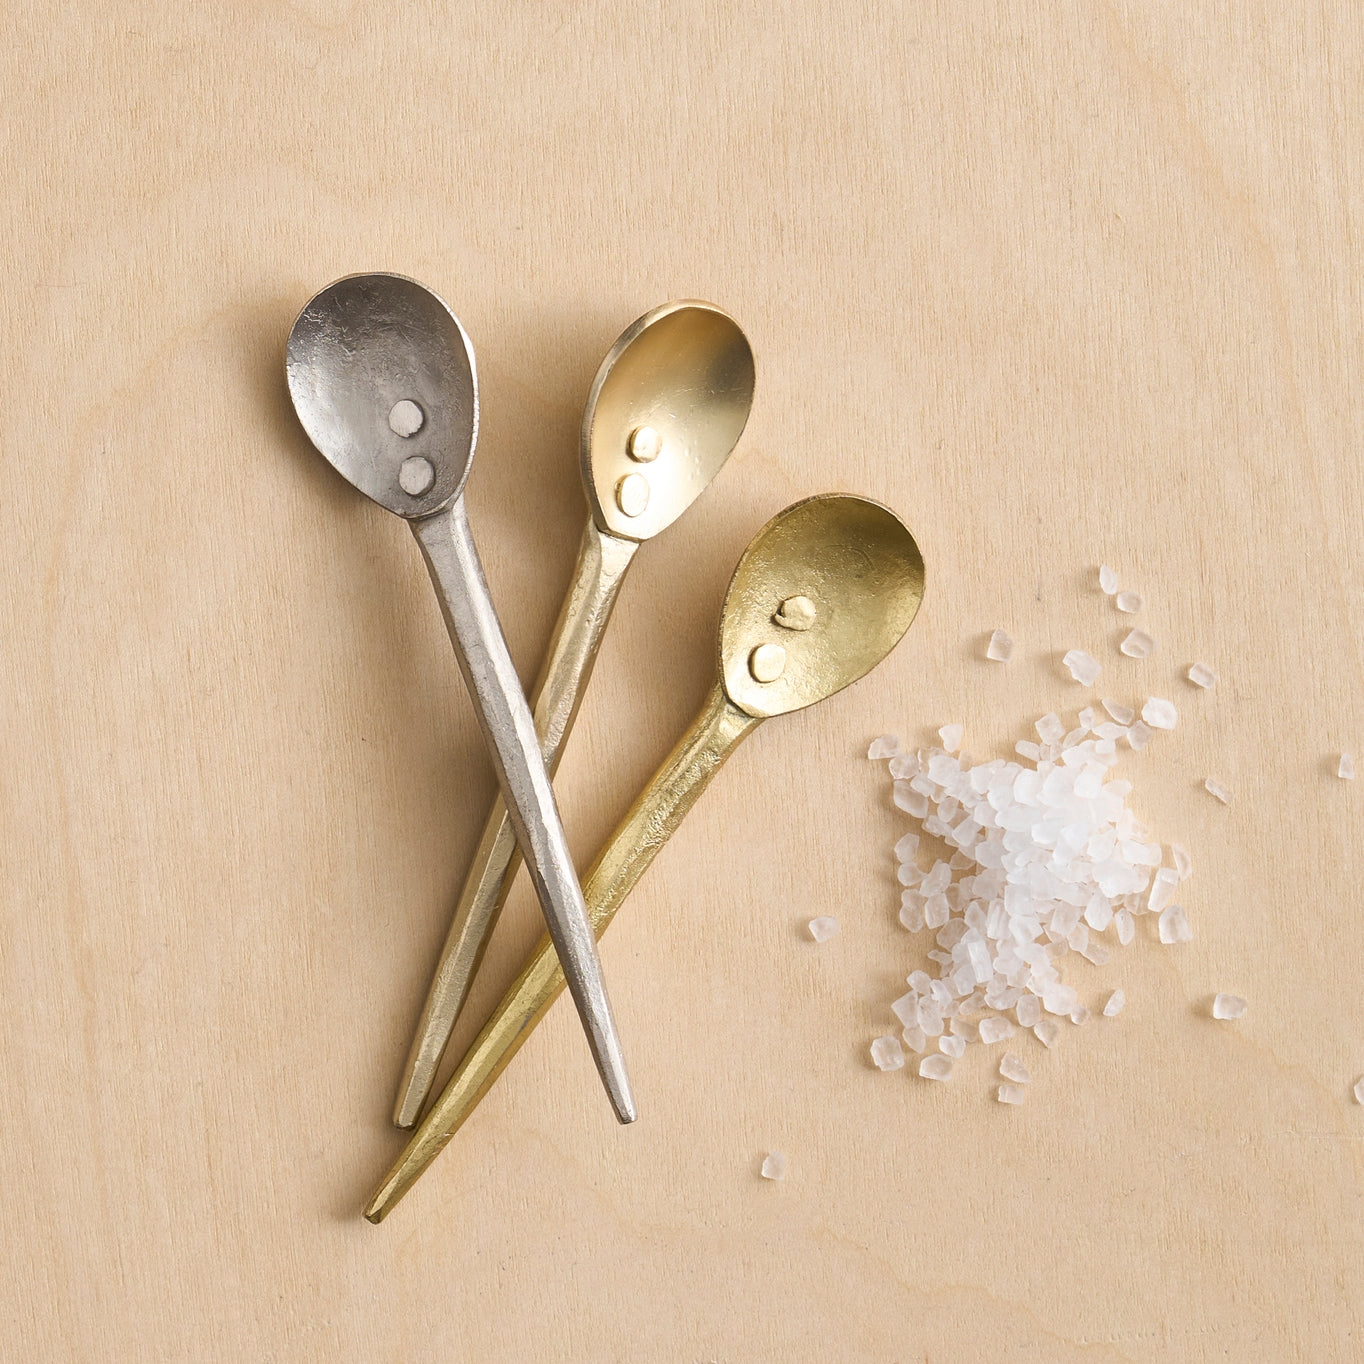 Three small spoons are perfectly sized for serving sauces, jams and sugars, or for stirring your morning brew. Set includes a spoon in each of three different finishes: hammered brass, hammered pewter and smooth satin brass. Crafted from mild steel.